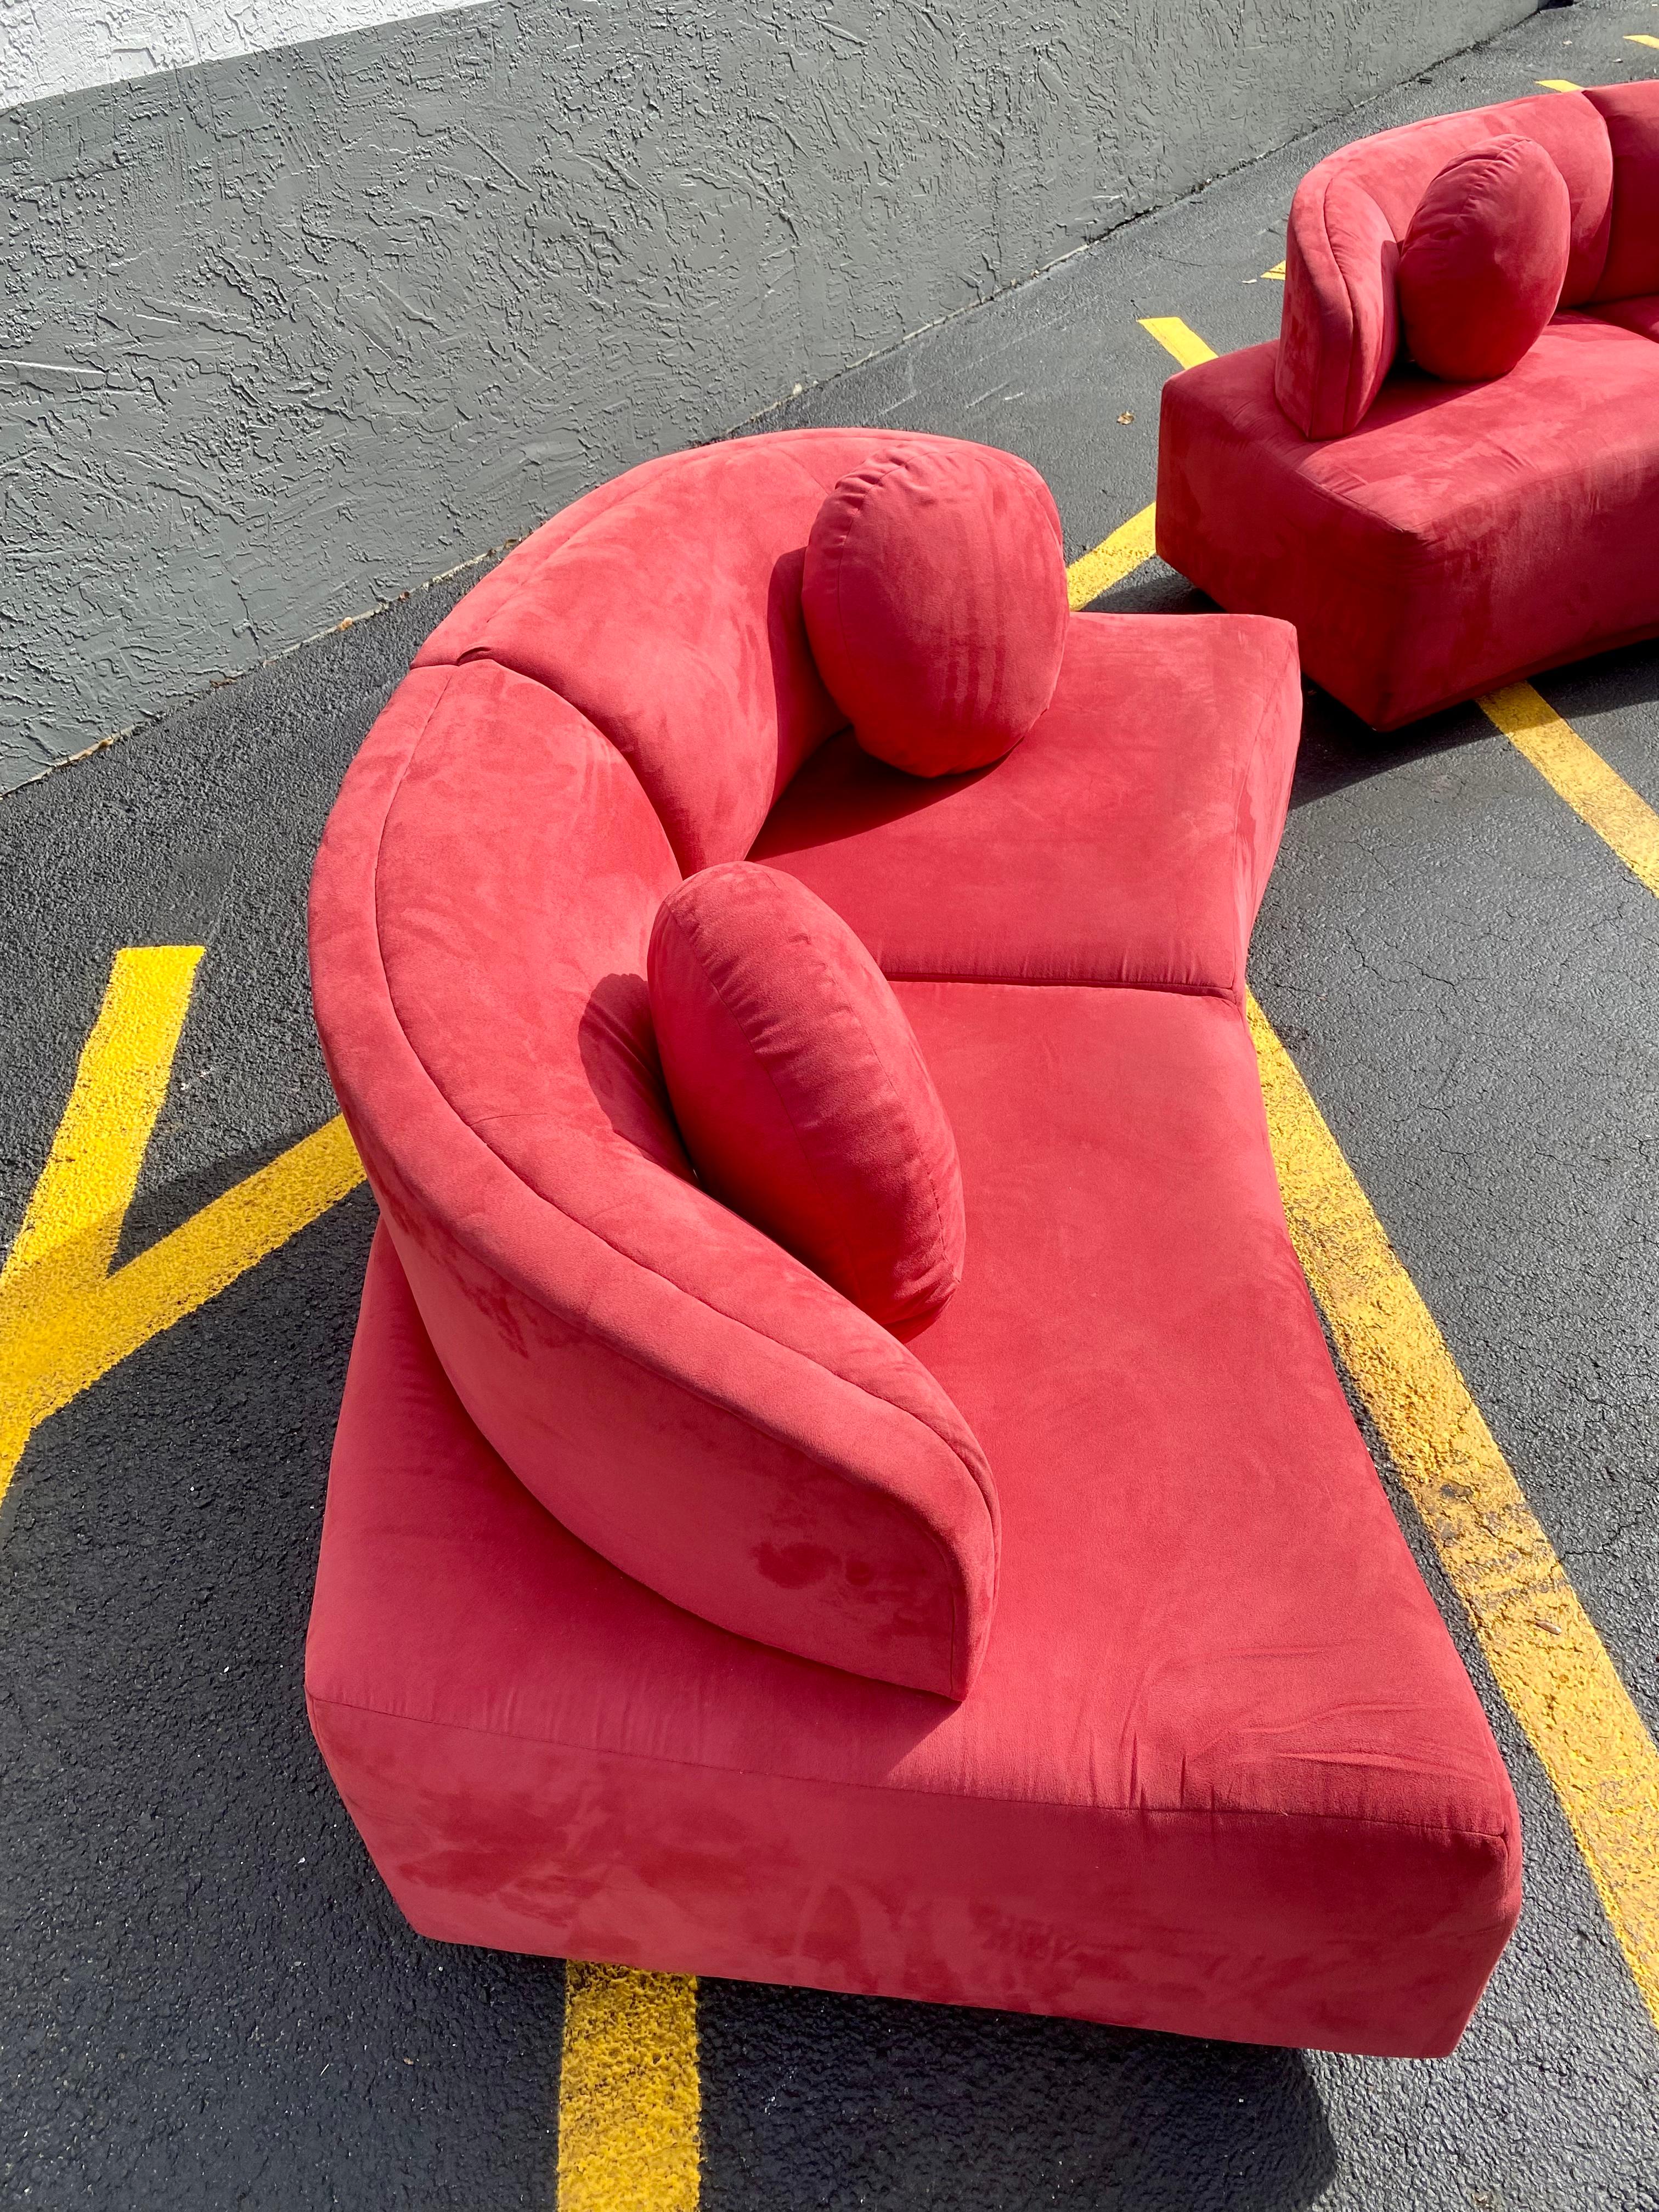 1980s Sculptural Weiman Red Cloud Sofa Loveseat, Set of 2 For Sale 4